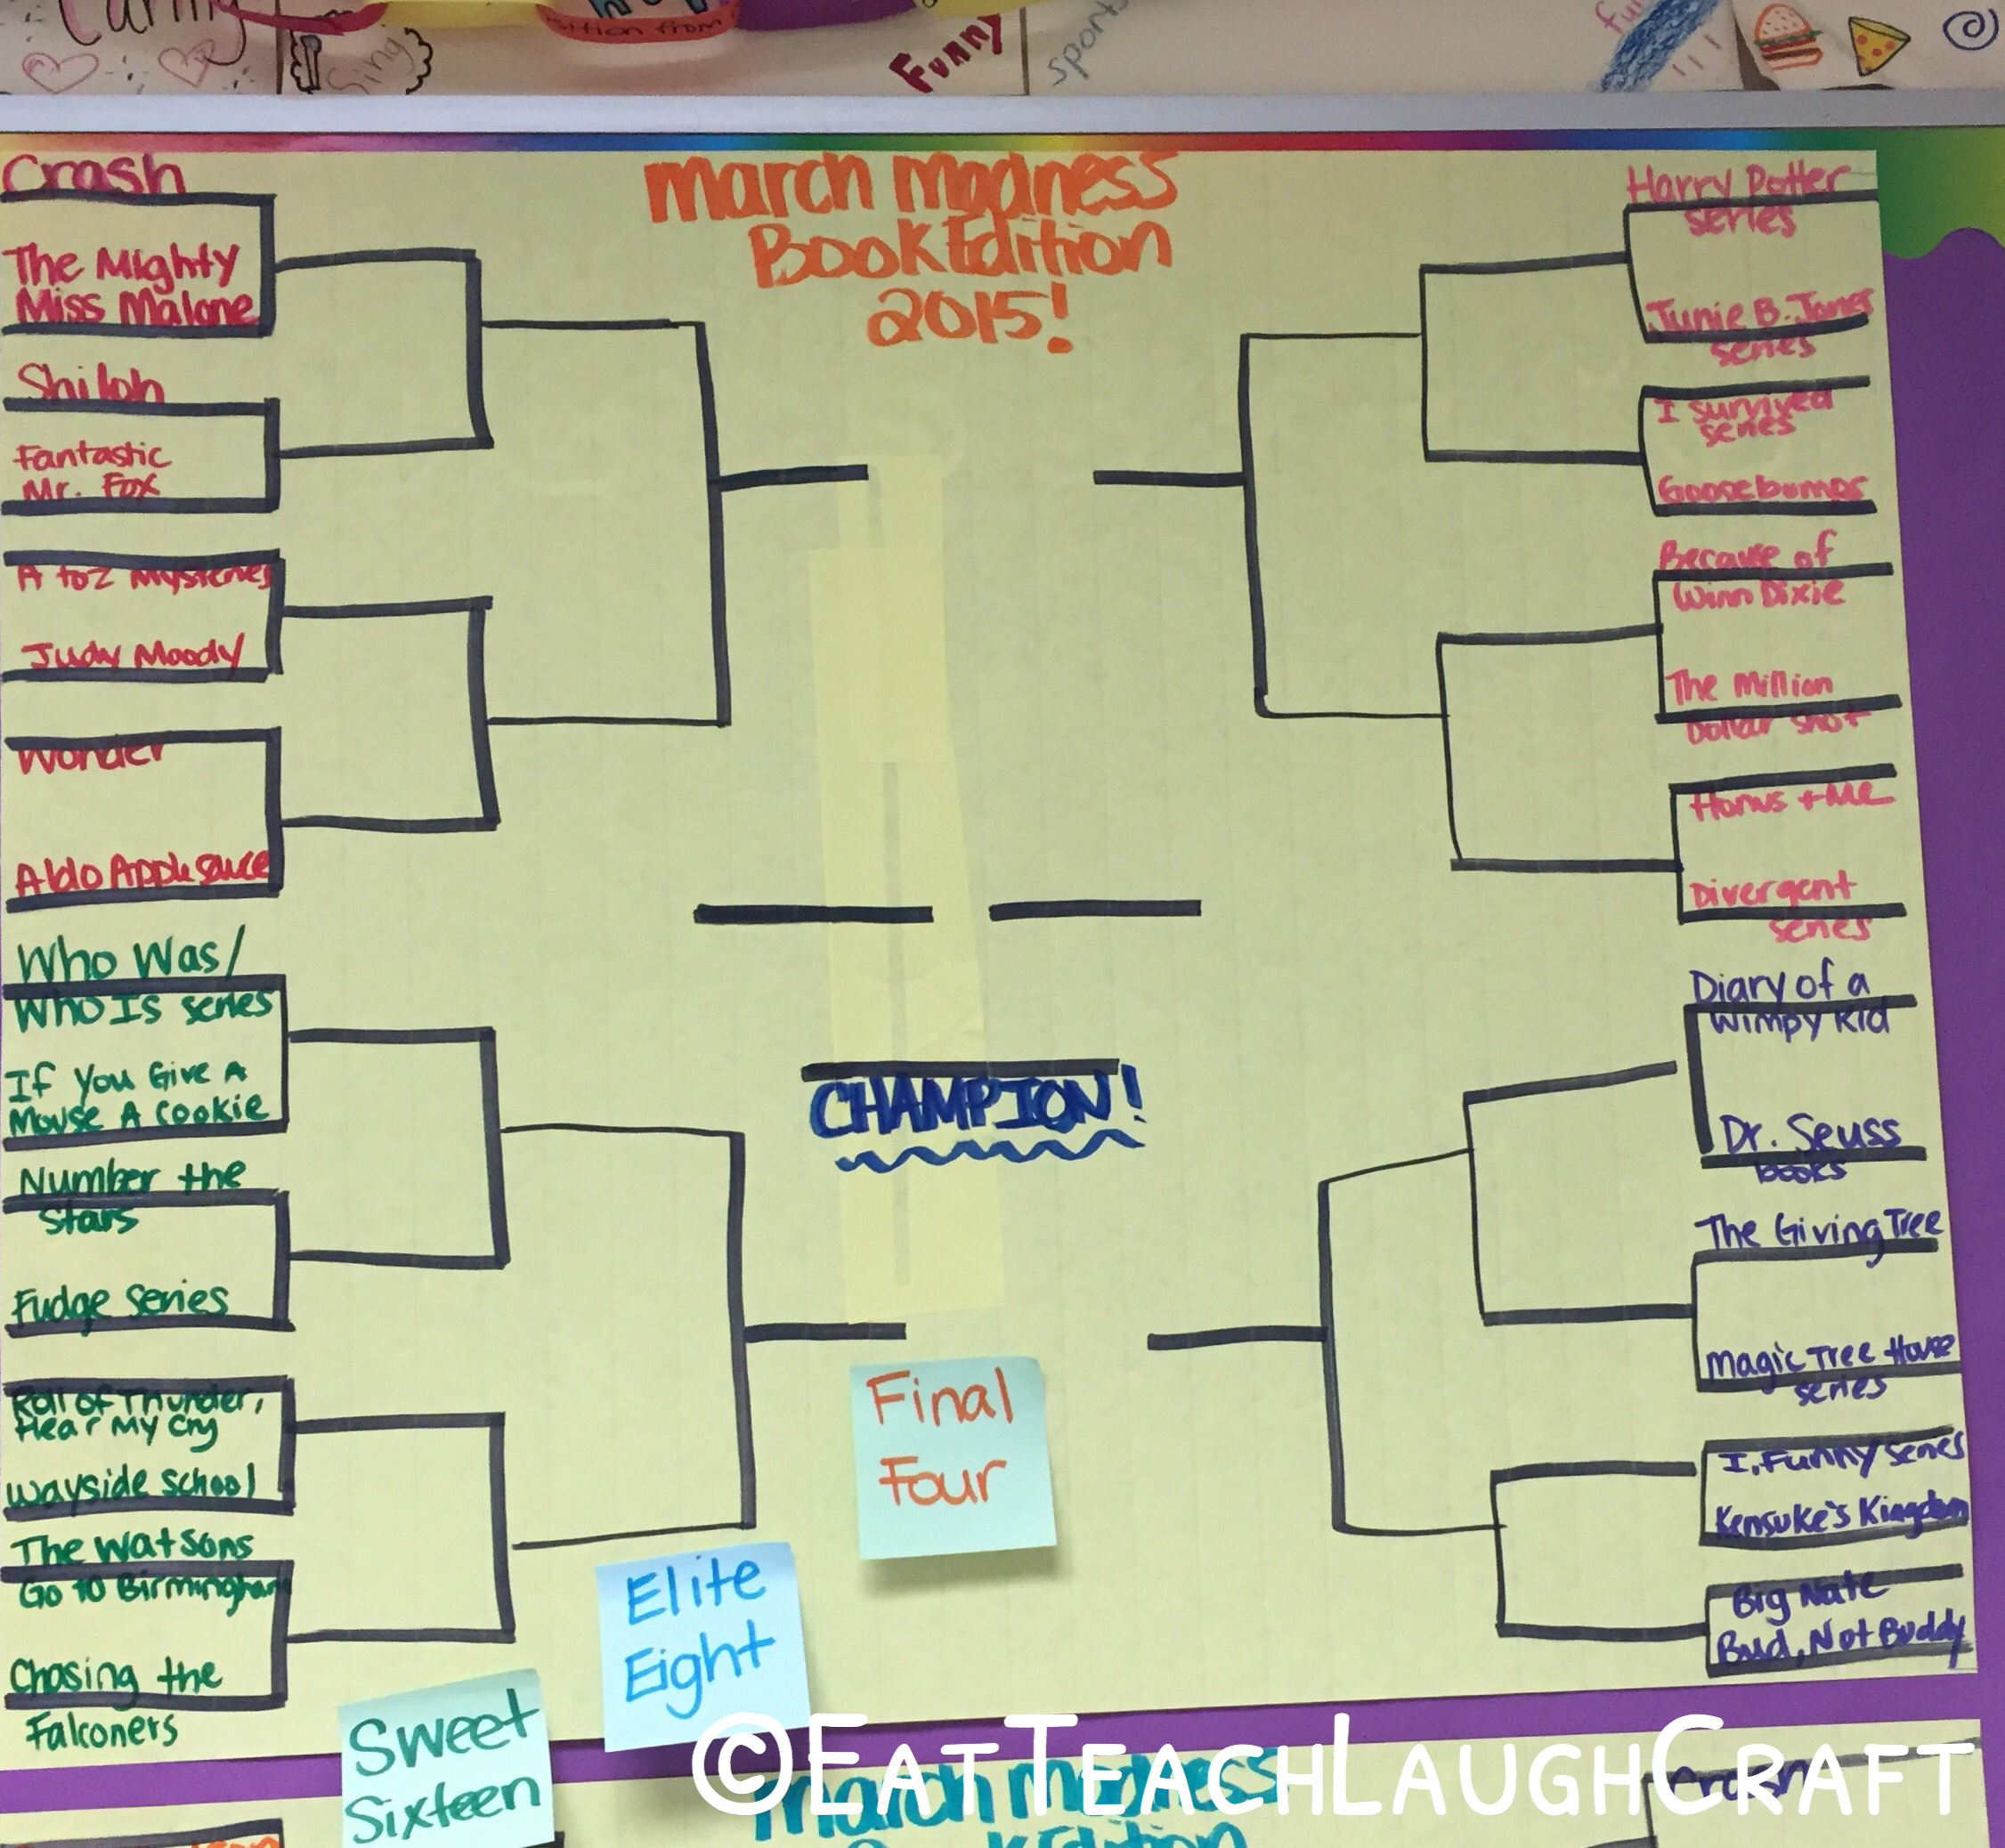 March Madness Book Edition AM